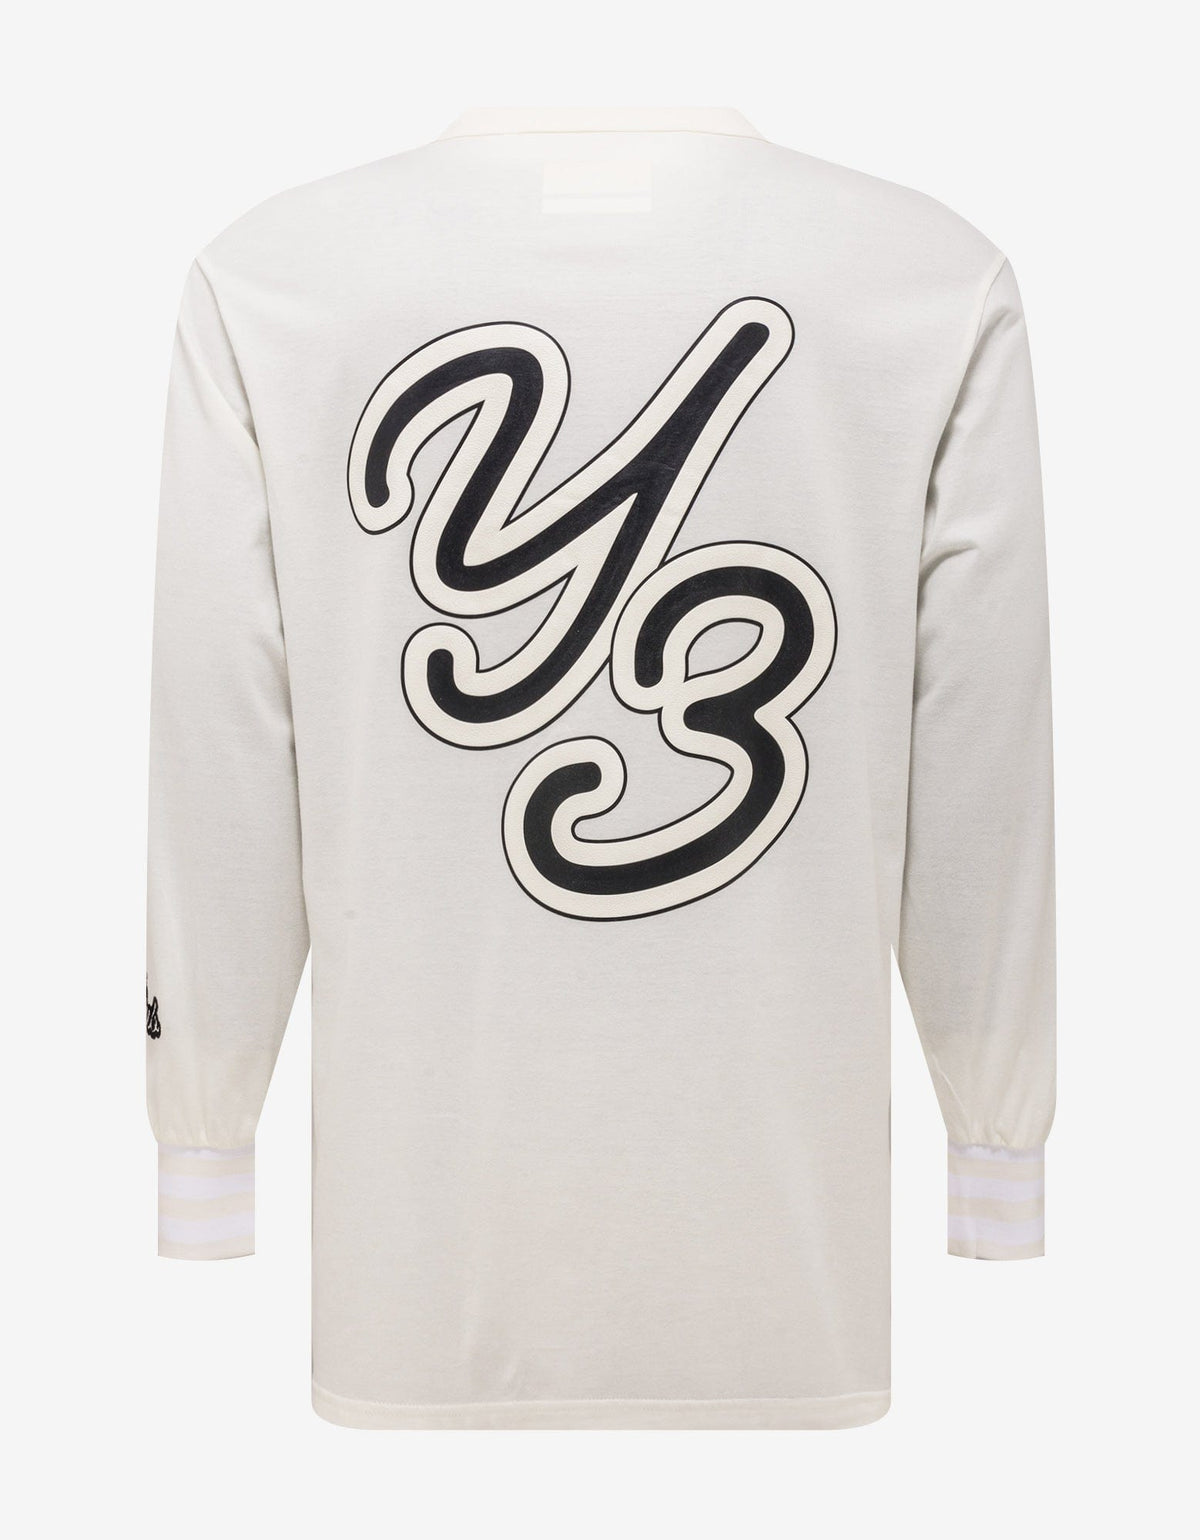 Y-3 Off White Graphic Long Sleeve T-Shirt